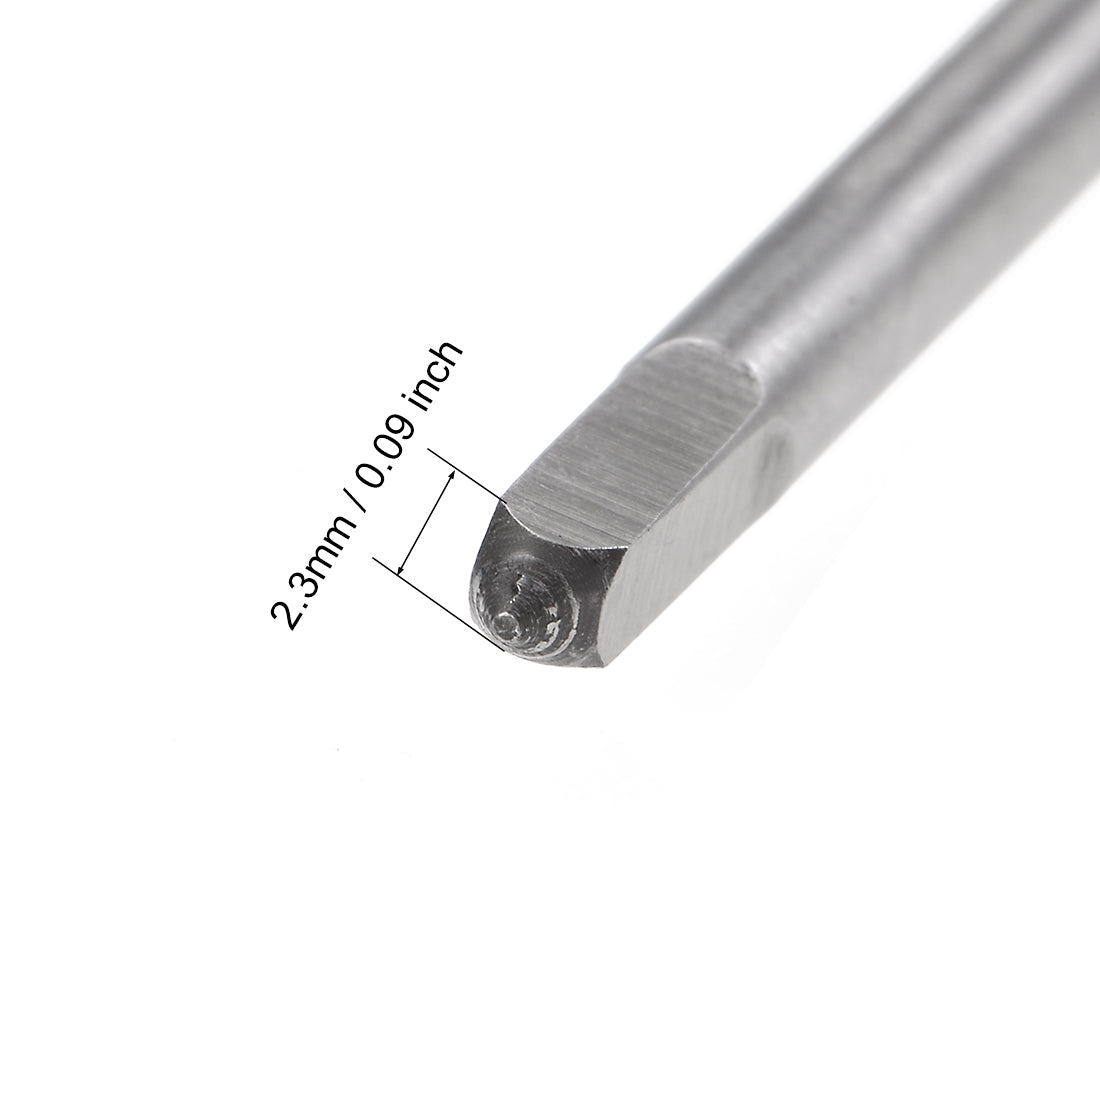 uxcell Uxcell Machine Tap 4-40 UNC Thread Pitch 3 Flutes High Speed Steel 2A Tolerance